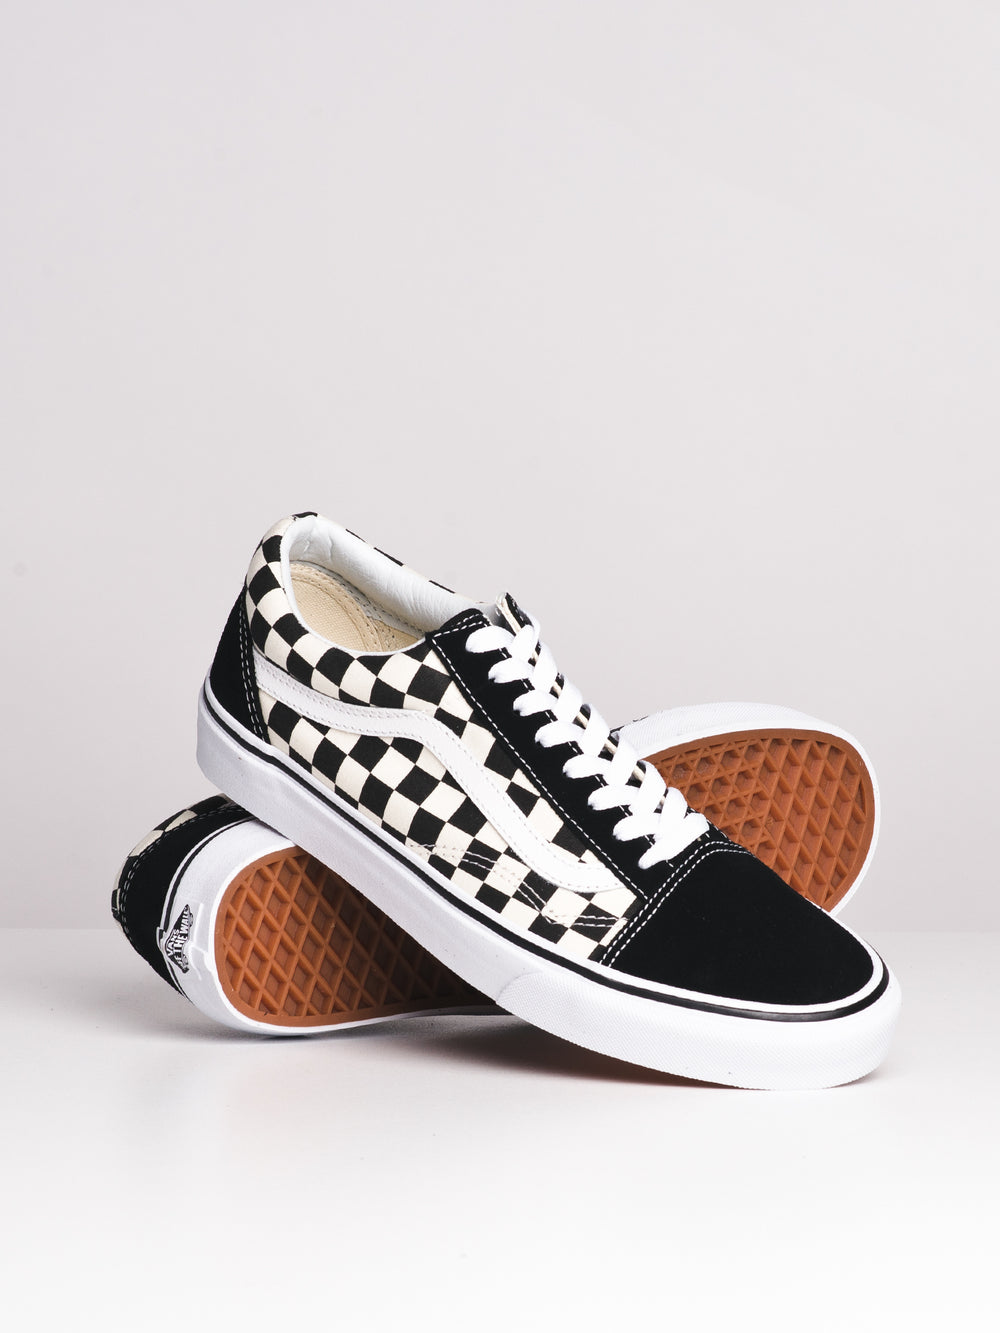 MENS VANS OLD SKOOL PRIMARY CHECKER CANVAS SHOES